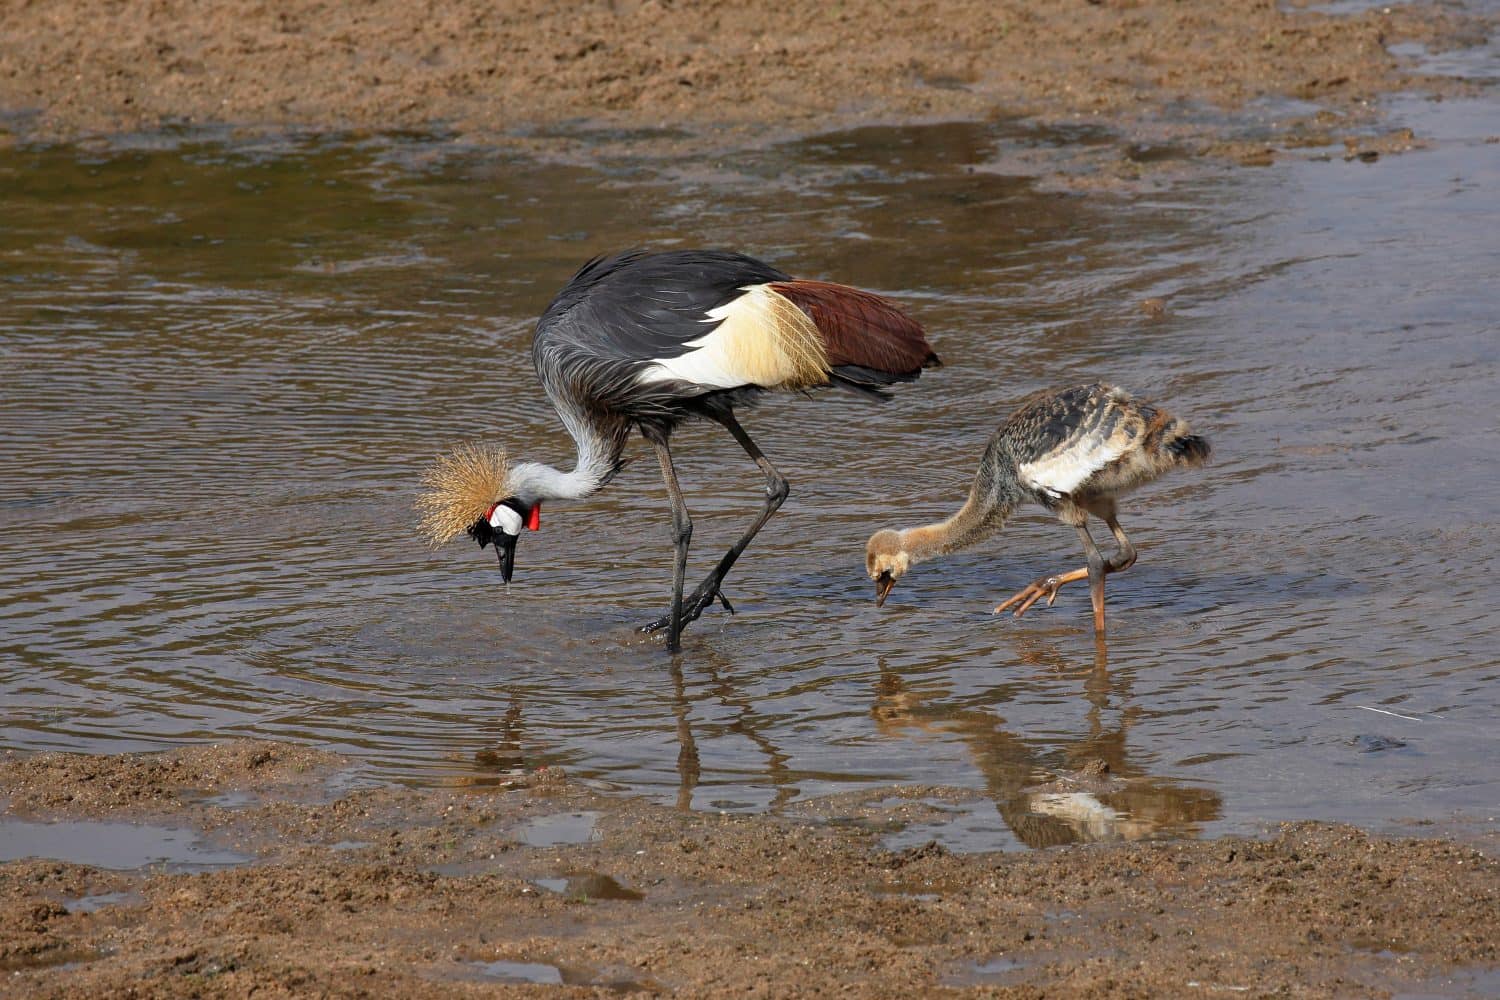 Grey Crowned Cranes (Balearica regulorum), adult and chick in water, Tarangire National Park, Tanzania, East Africa